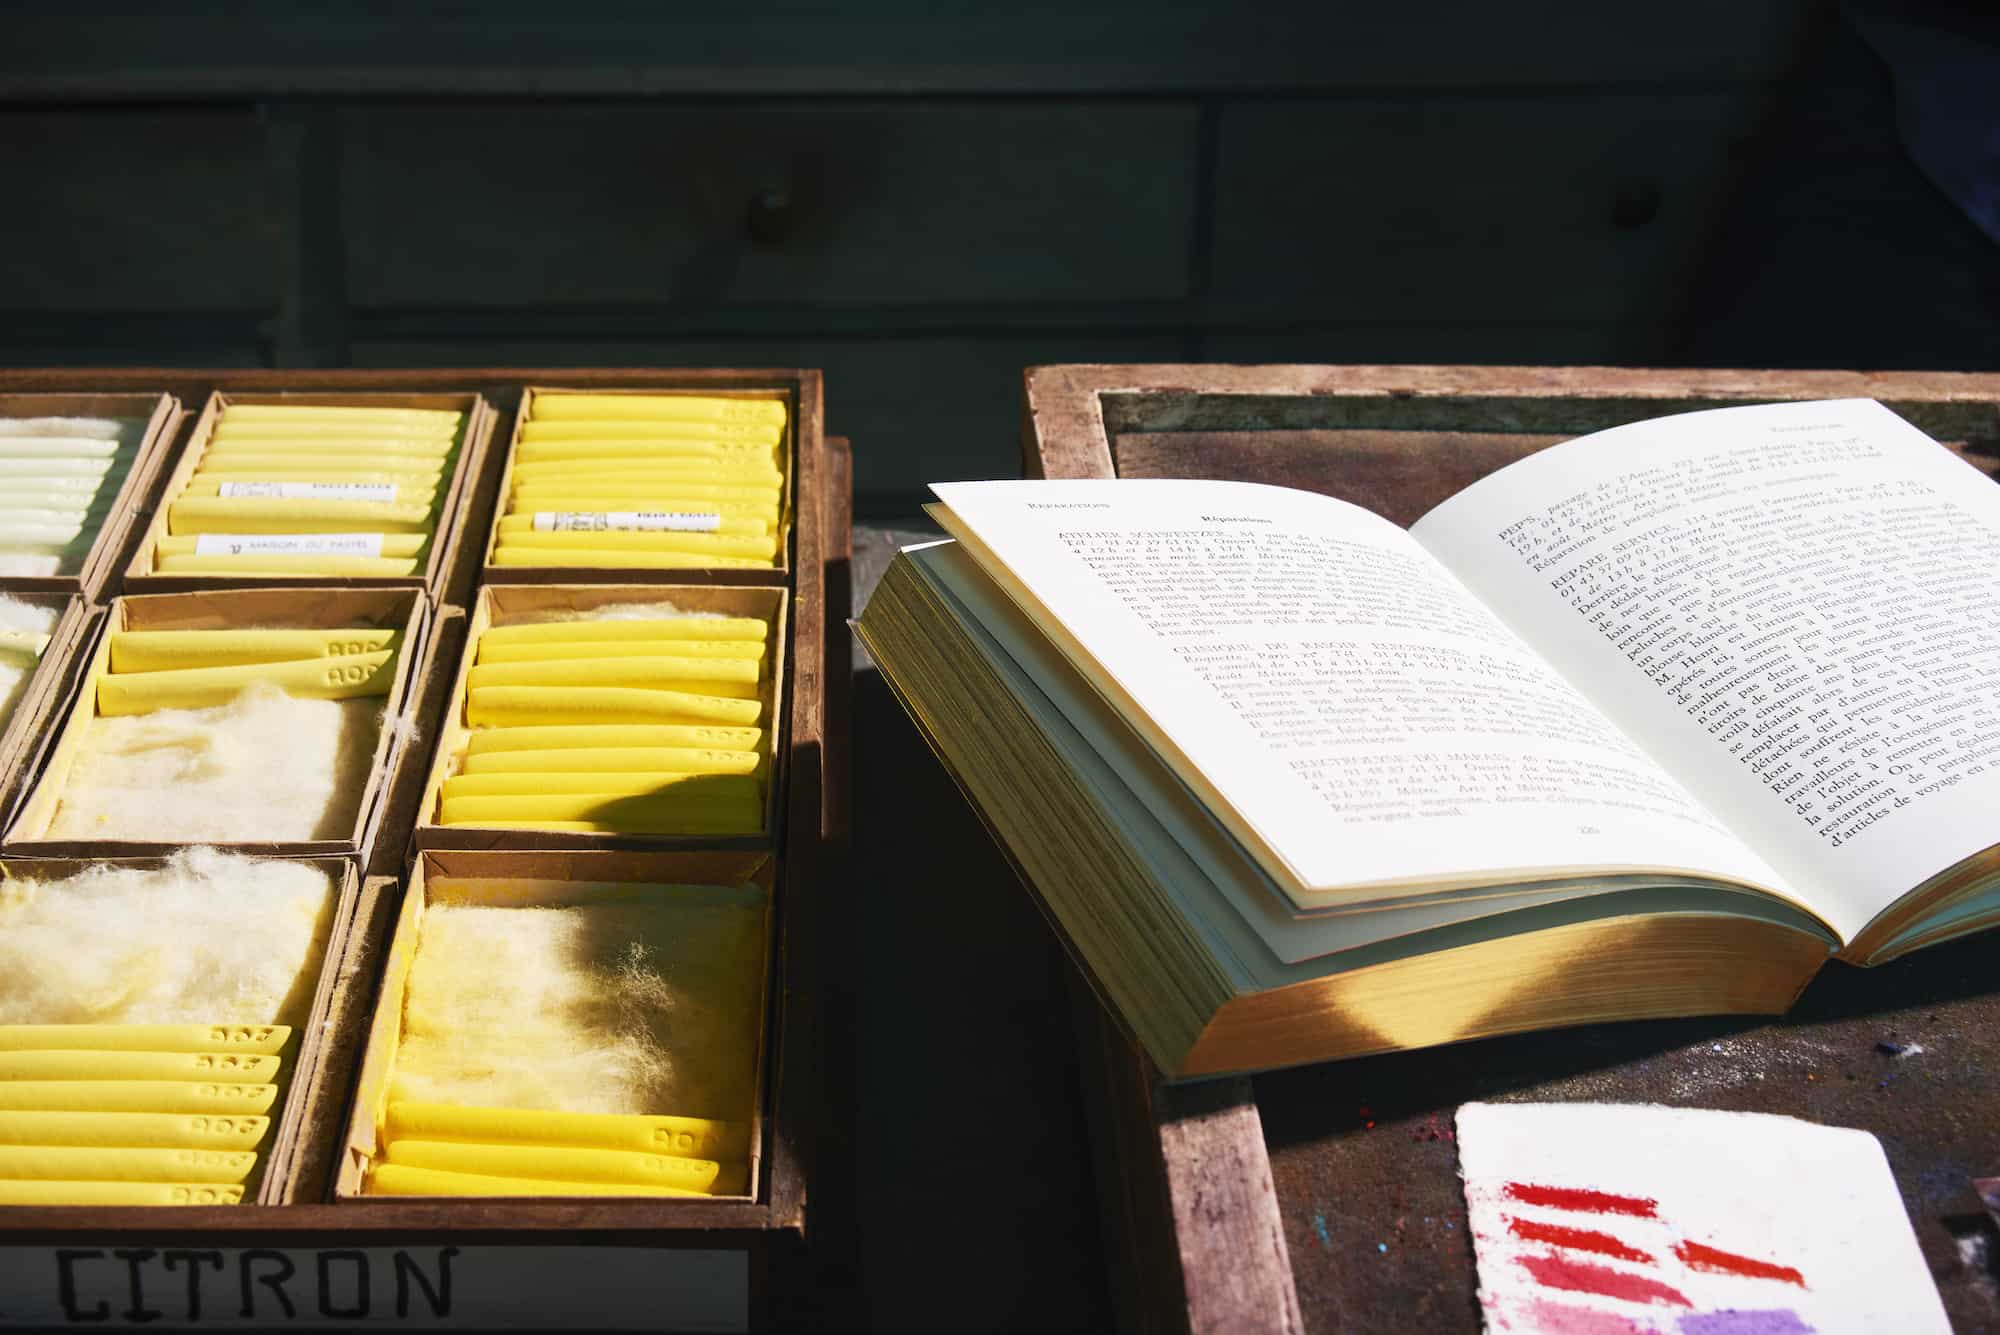 A book by Astier de Vilatte, with gold trim, opened on a wooden tray, outside in the sun.